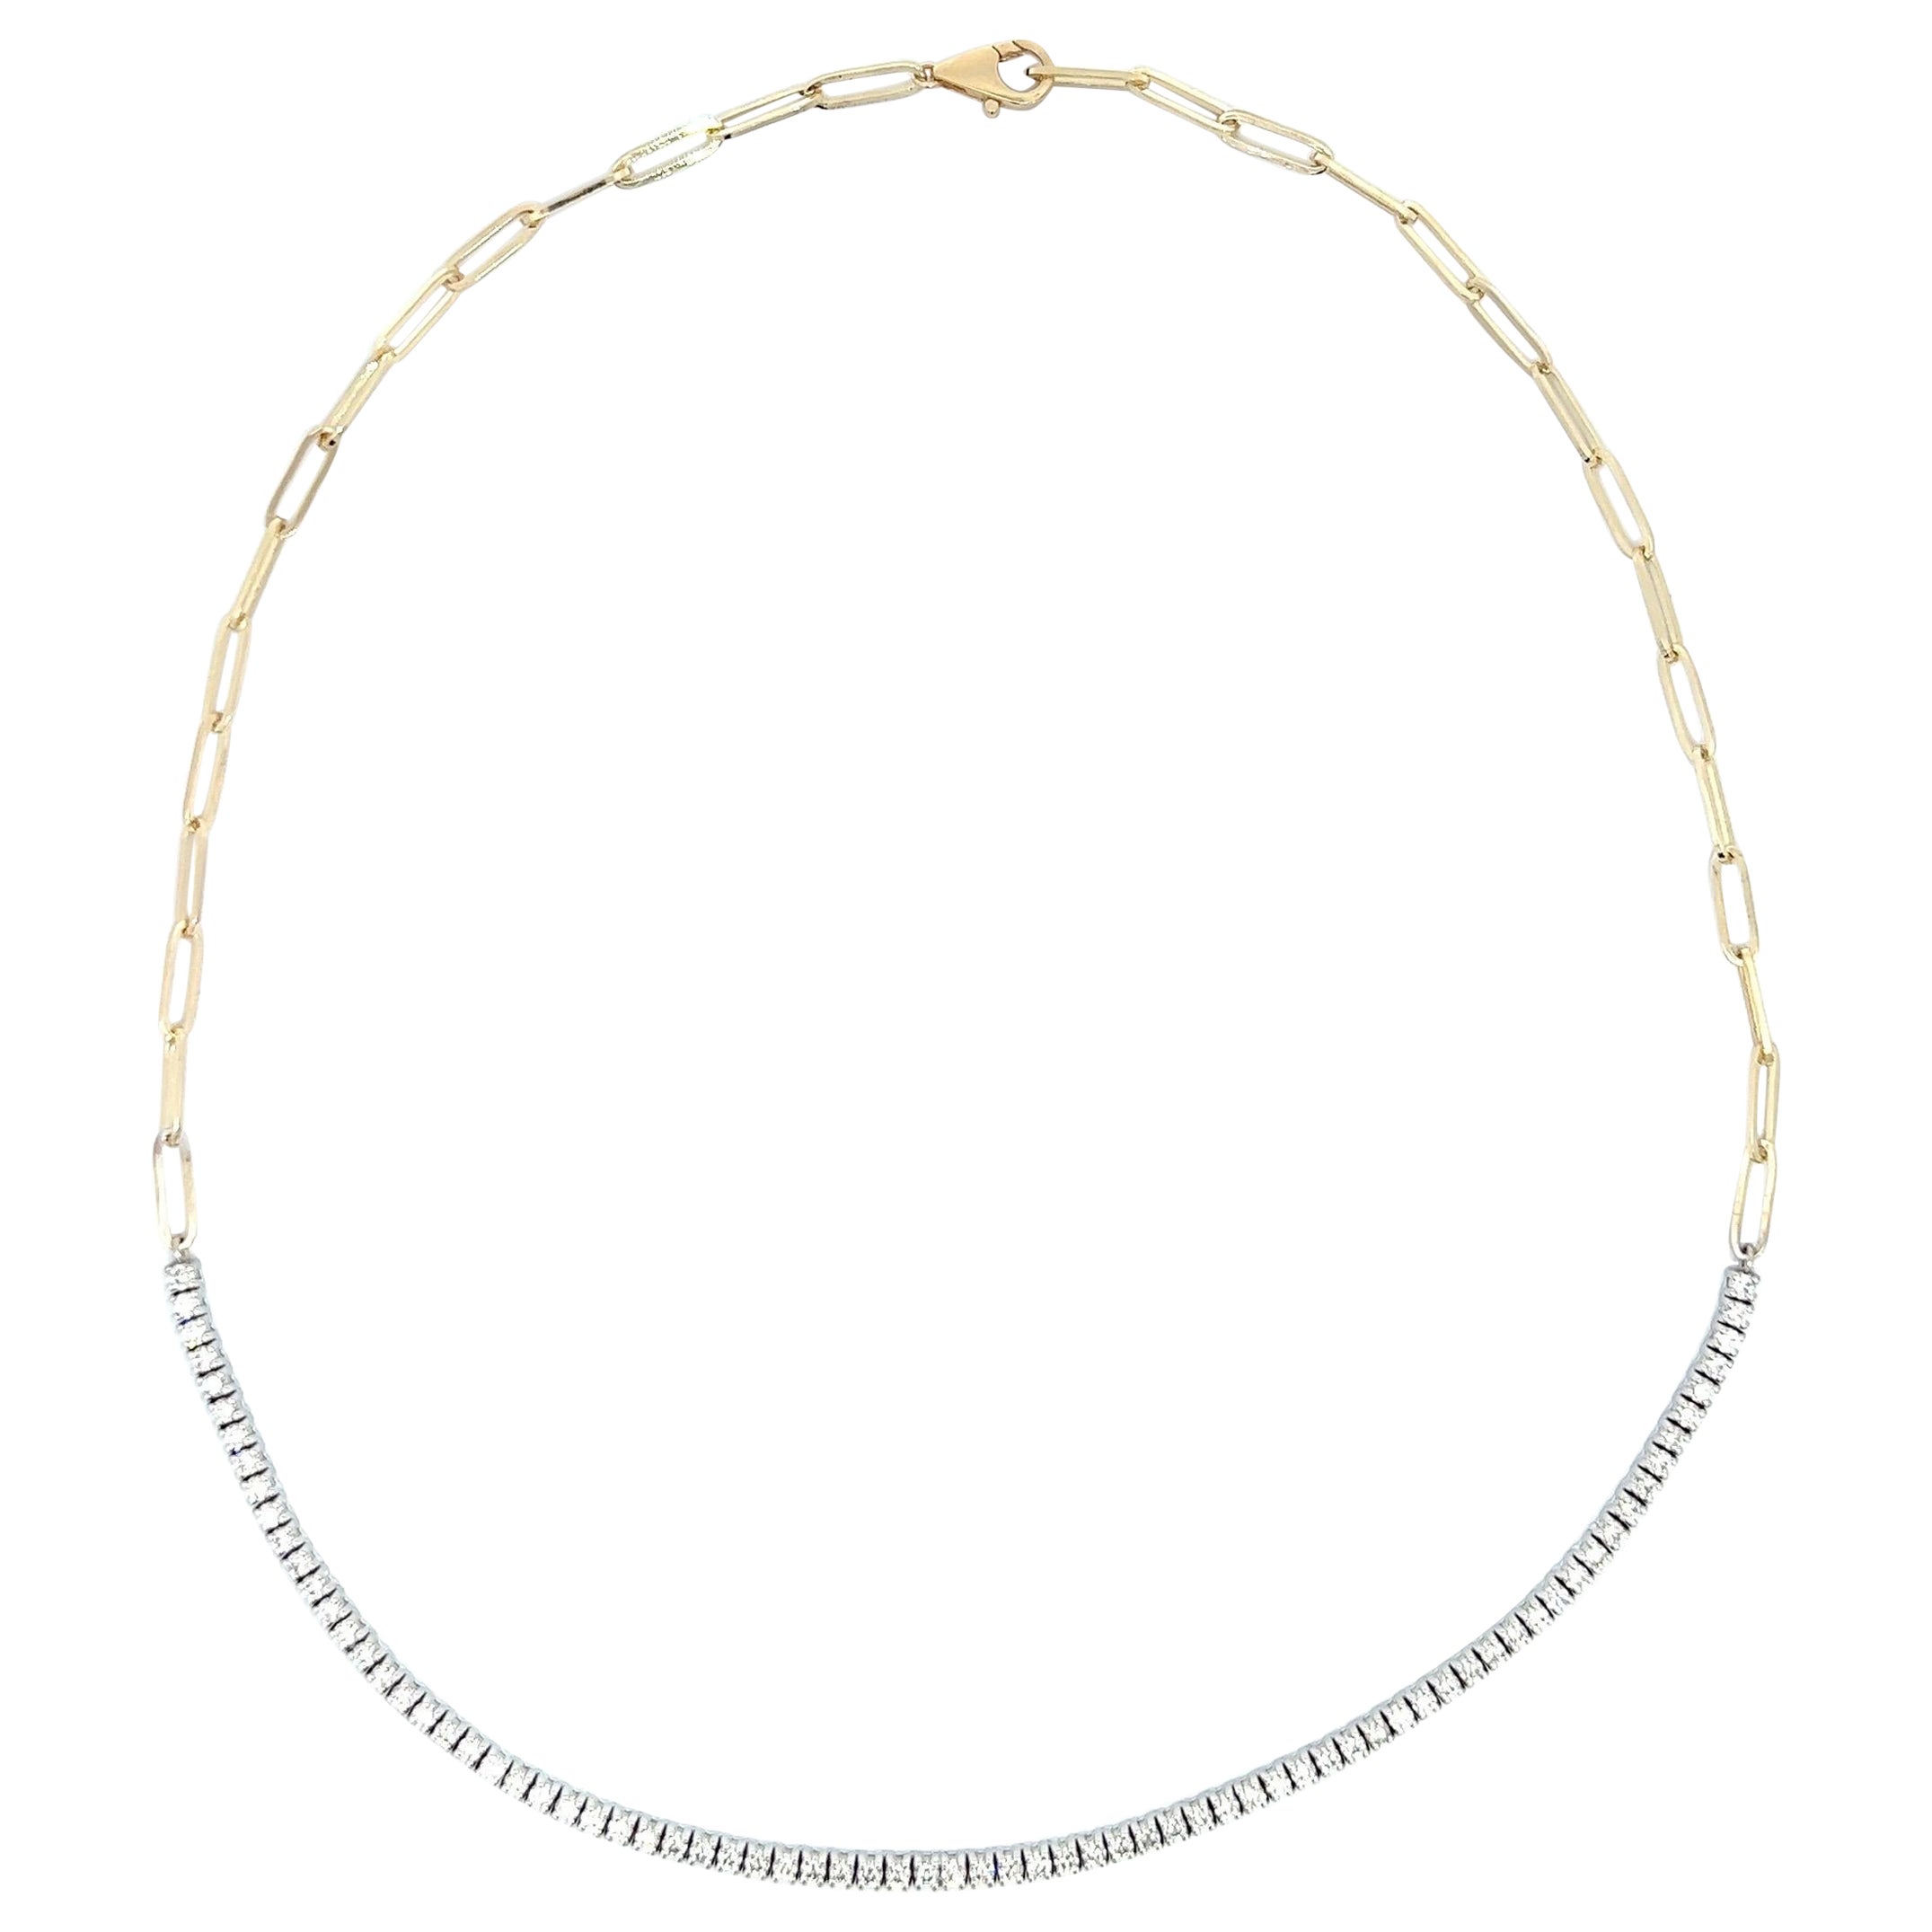 Half-way Paper-clip Chain & Half-way Diamond Tennis Necklace, 14k Two-Tone.
This is the most popular style of Chain/Necklace in the market.
Half of the chain has 30 Paper-Clip links in 14k yellow gold, and half has 76 natural full cut diamonds in